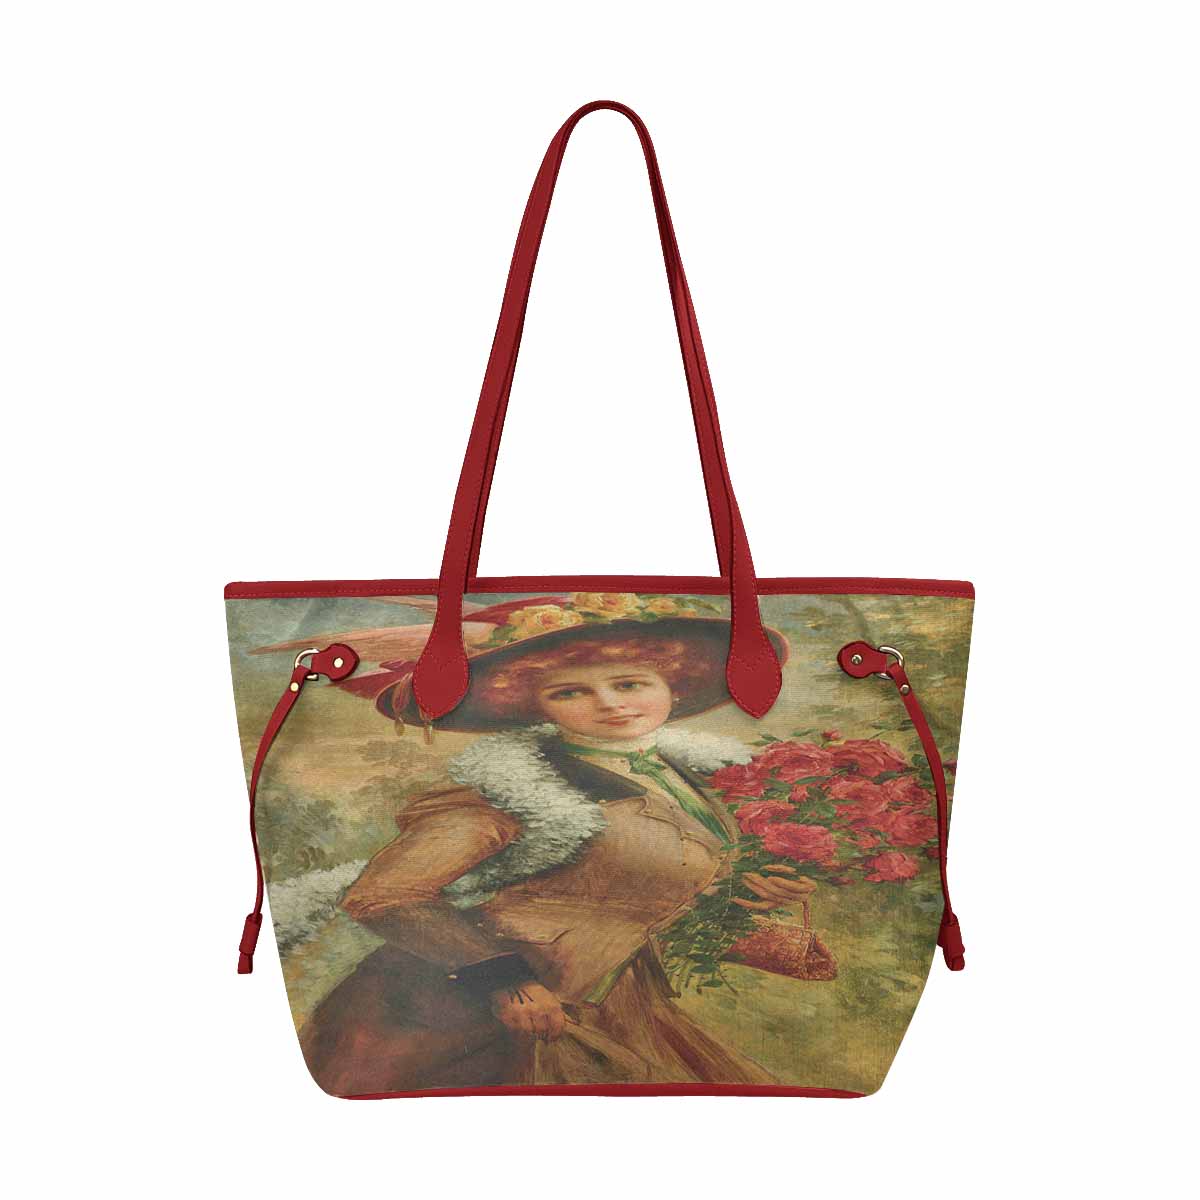 Victorian Lady Design Handbag, Model 1695361, Elegant Lady With A Bouquet of Roses, RED TRIM